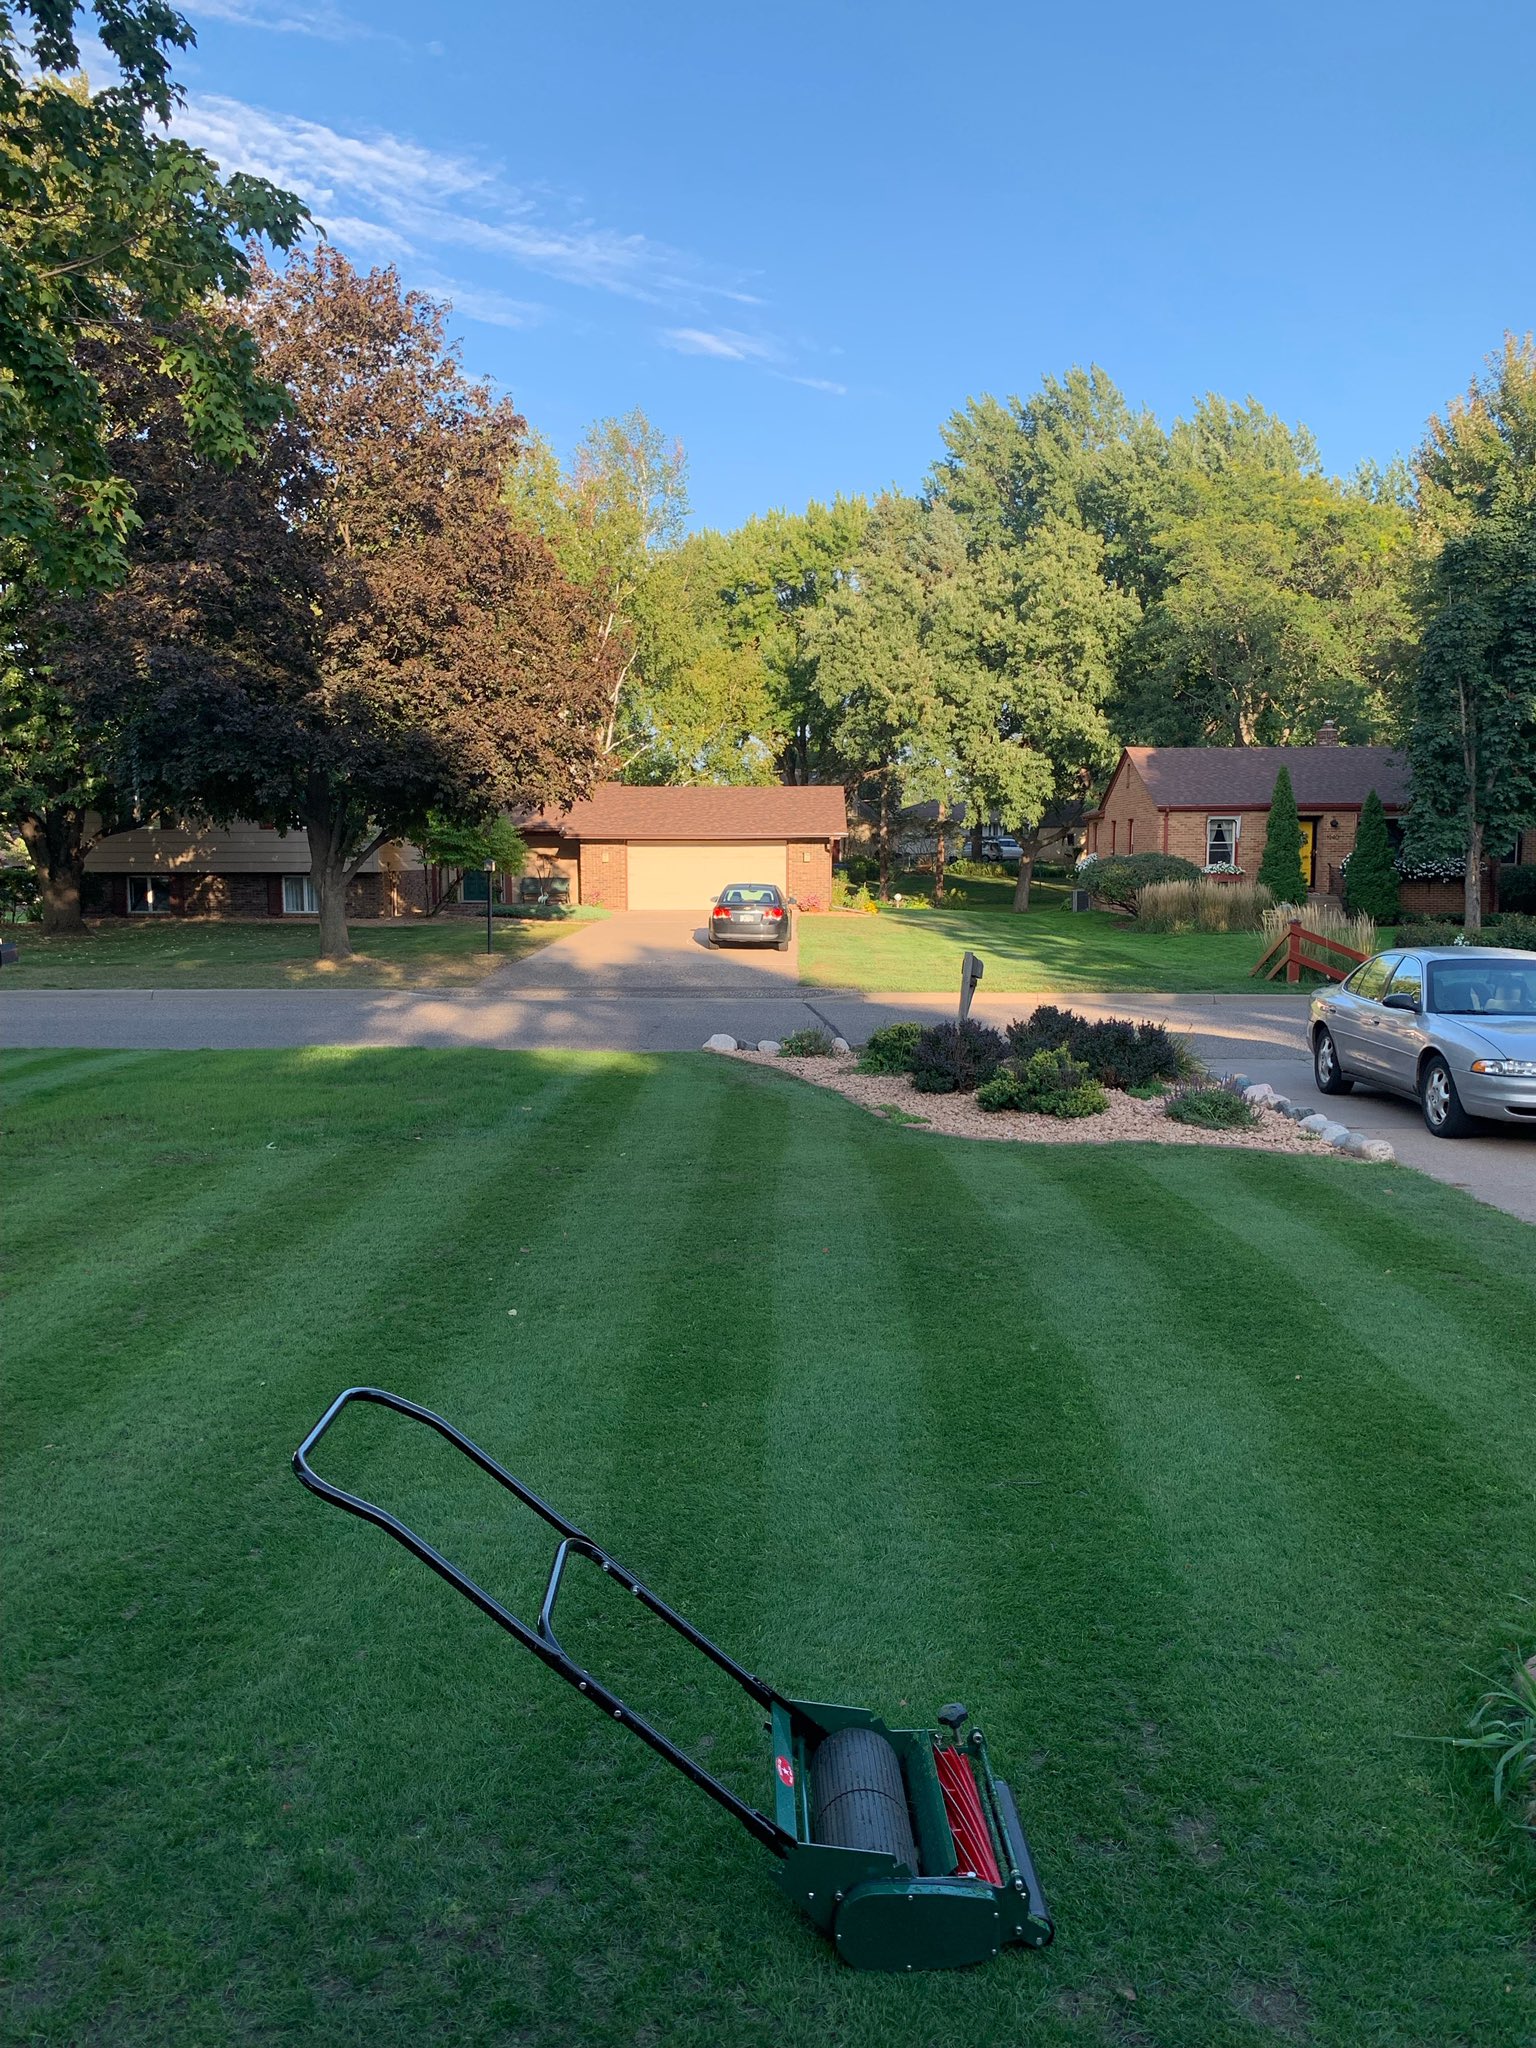 Hudson Star Greens Mowers on X: Bill from Minnesota said “I have used the  HudsonStar twice now and love the quality of cut and maneuverability of the  mower!” Another happy customer using